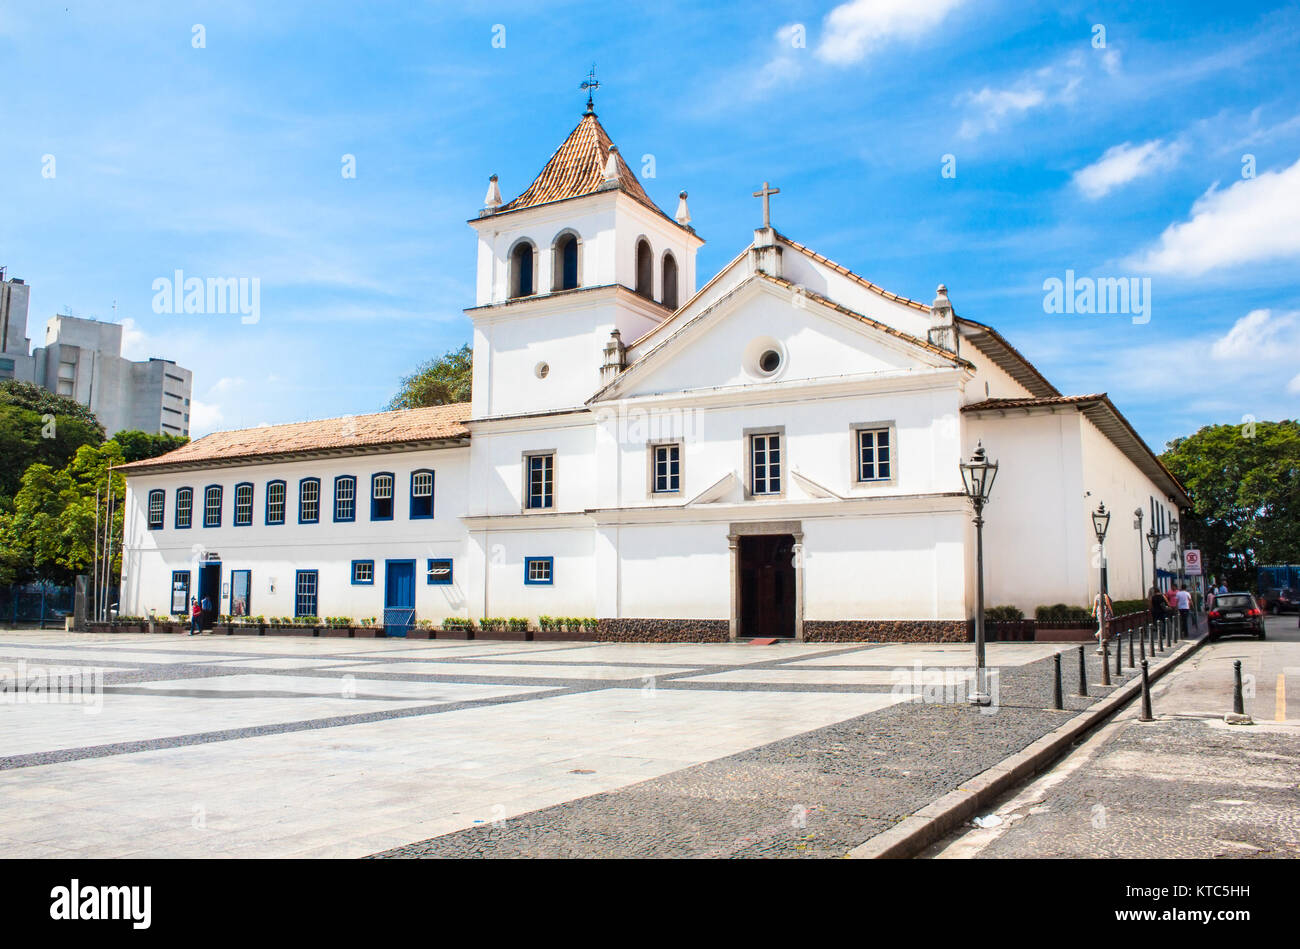 SAO PAOLO,BRAZIL-Aplil 17,2015: Patio do Colegio is the name given to the historical Jesuit church and school in Sao Paulo, Brazil on April 17, 2015.  Stock Photo